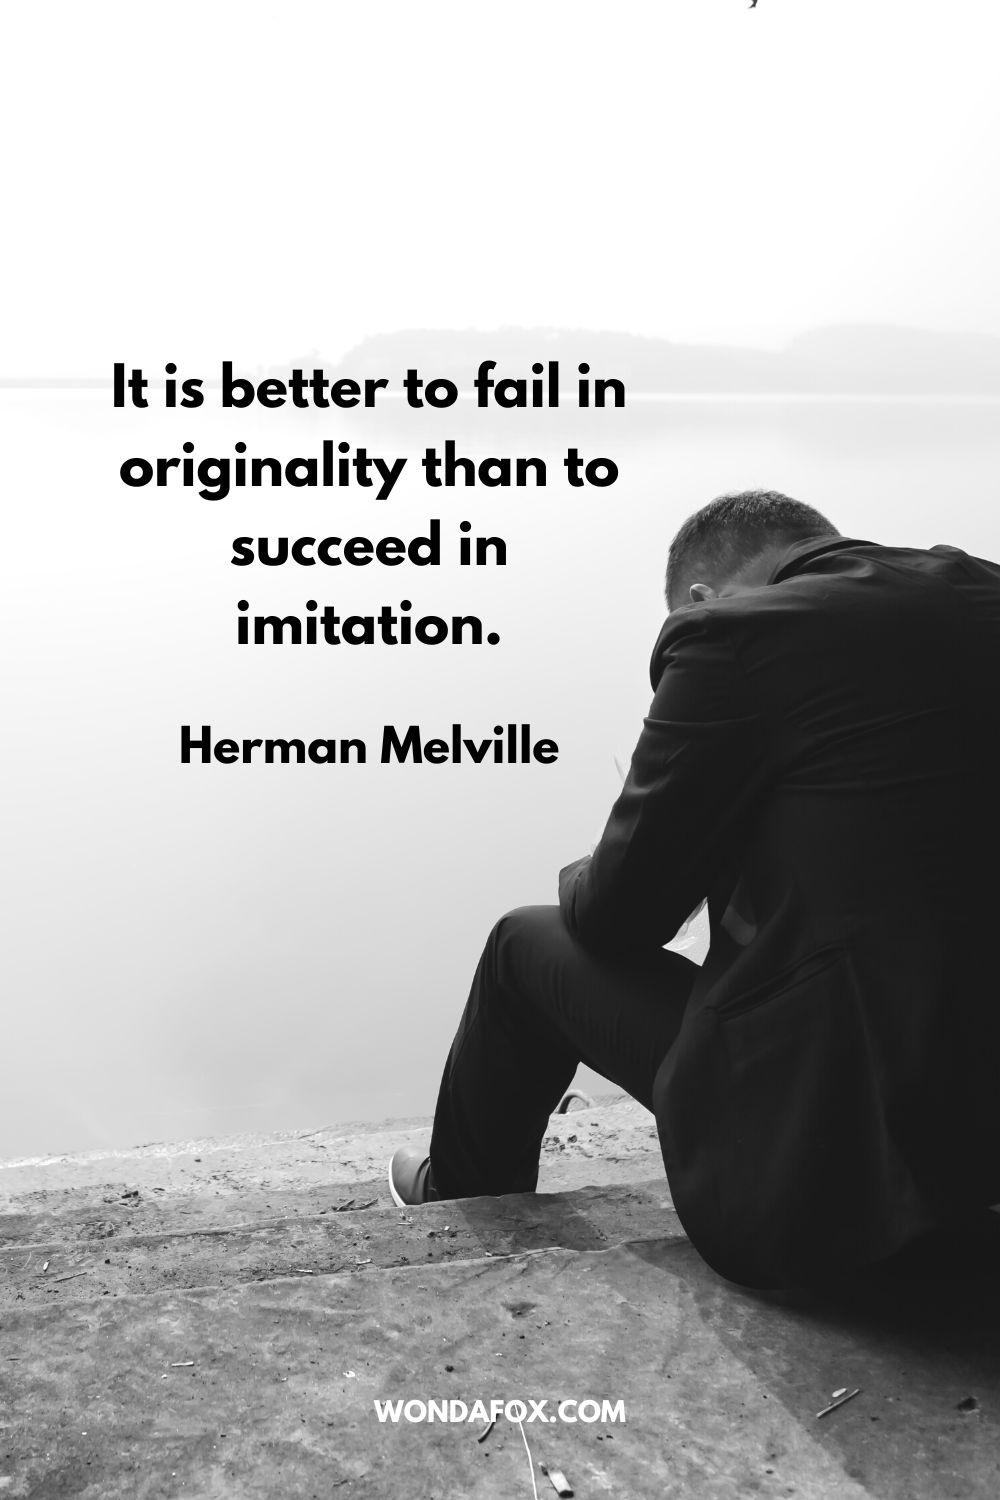 It is better to fail in originality than to succeed in imitation. Herman Melville